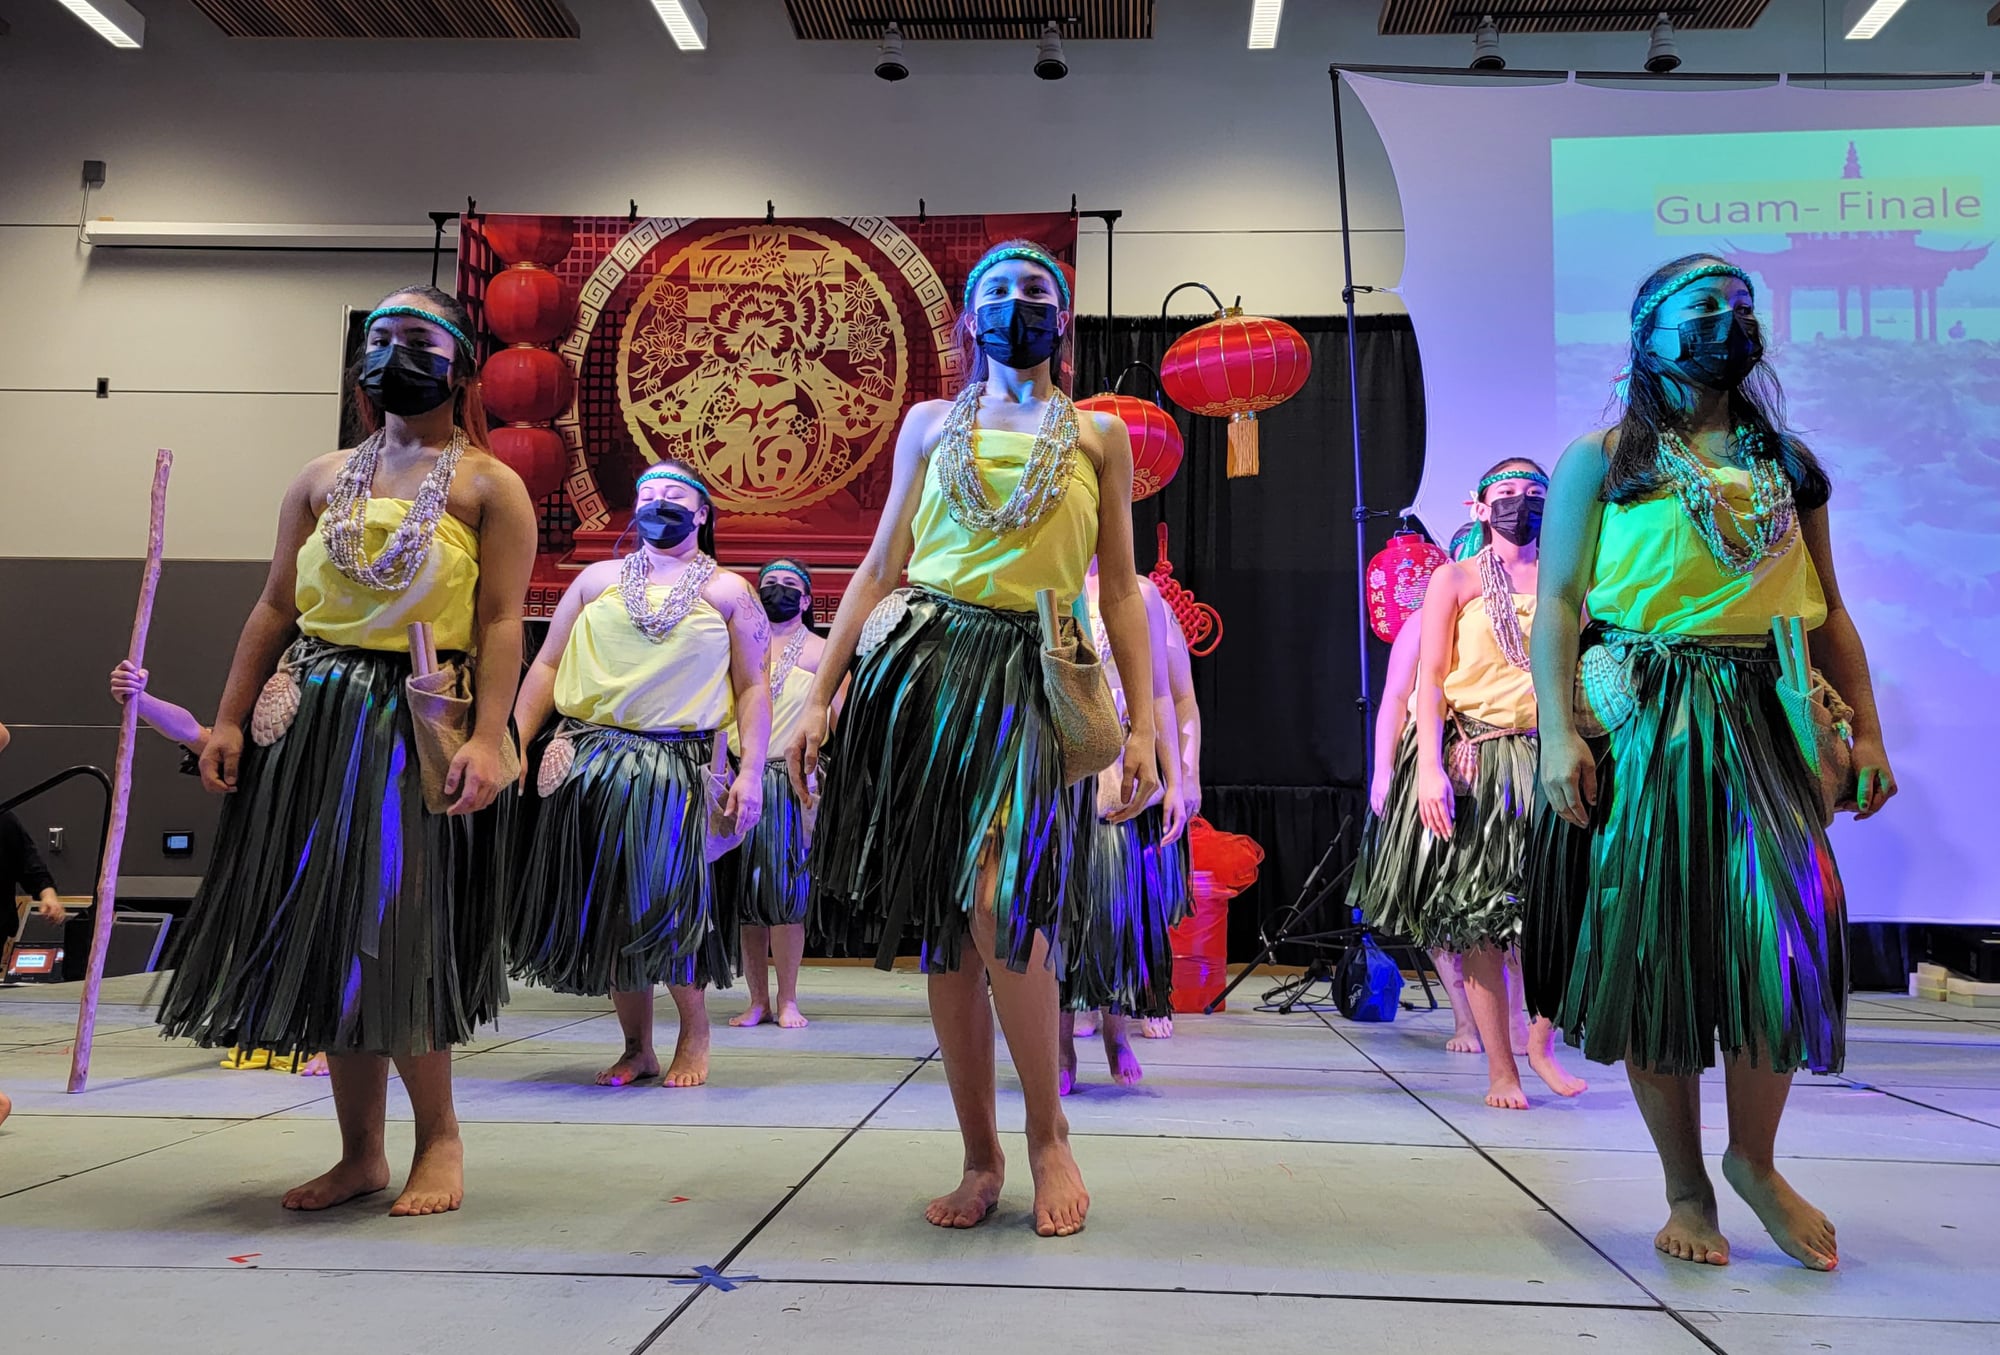 A group of individuals wearing hula skirts, necklaces, and headbands dance inside a room.